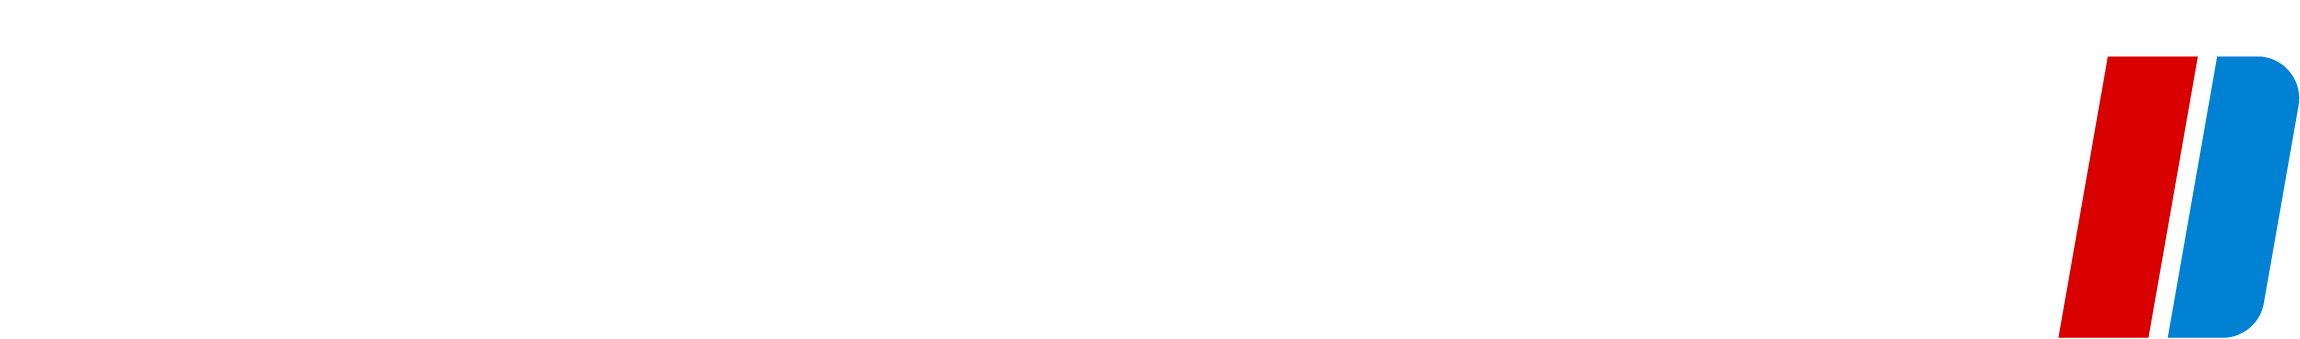 RSTRONIC